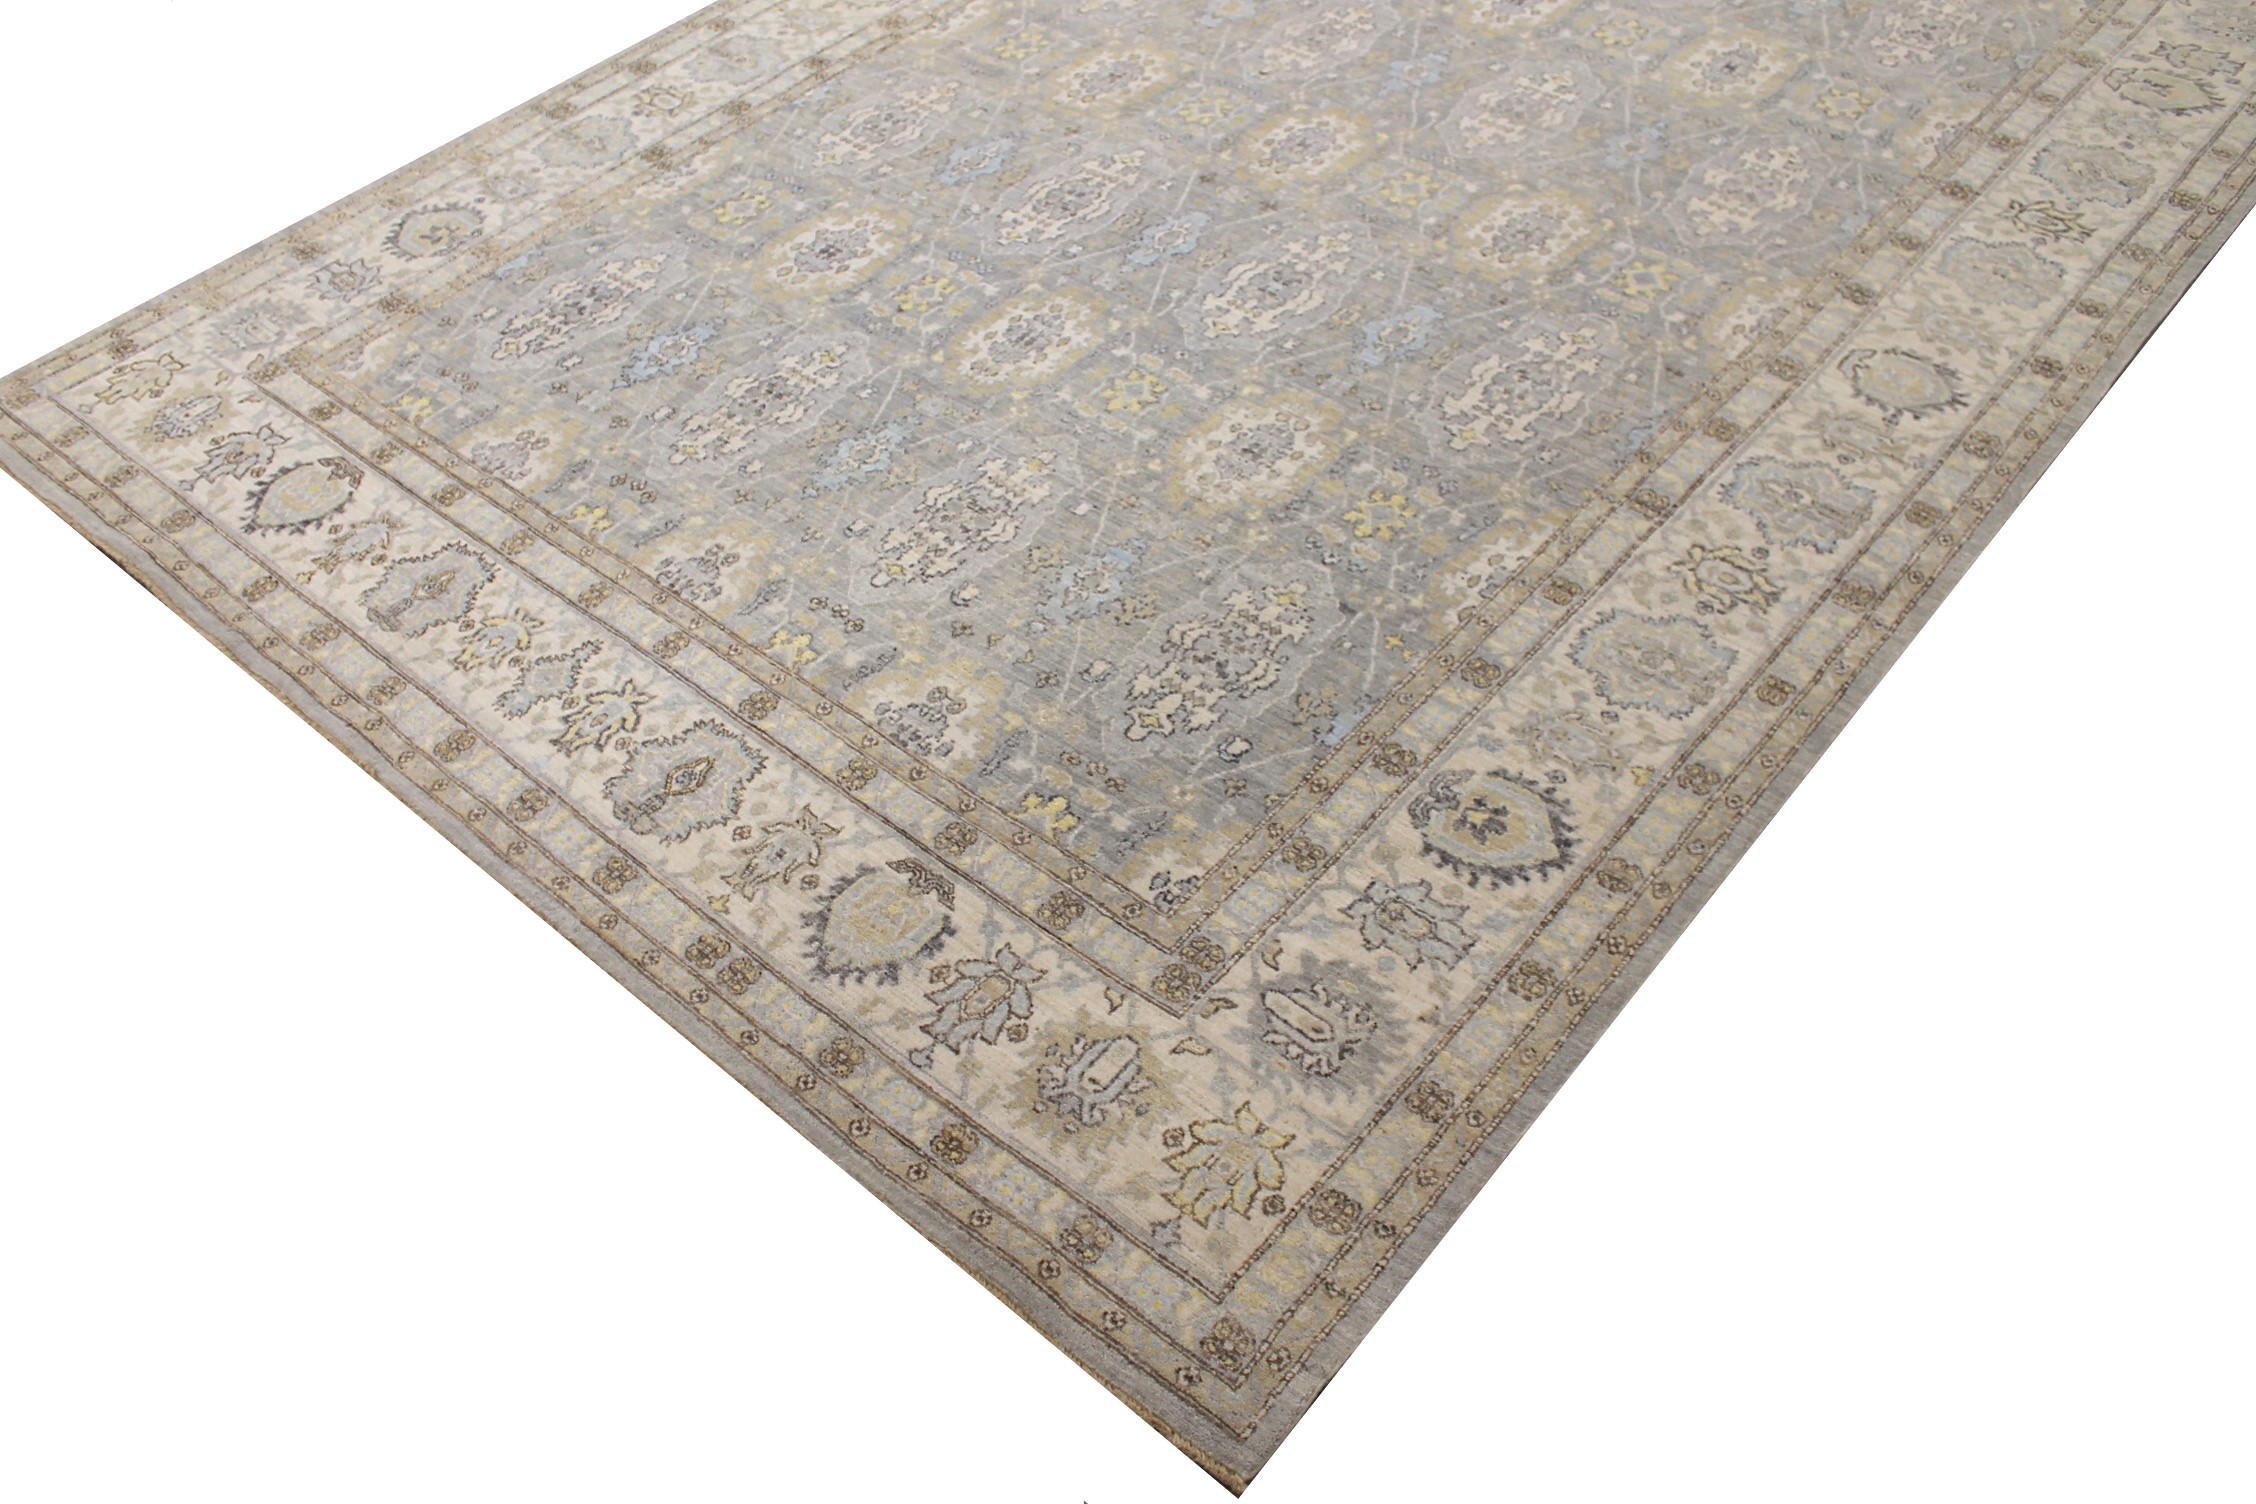 9x12 Peshawar Hand Knotted Wool Area Rug - MR027814